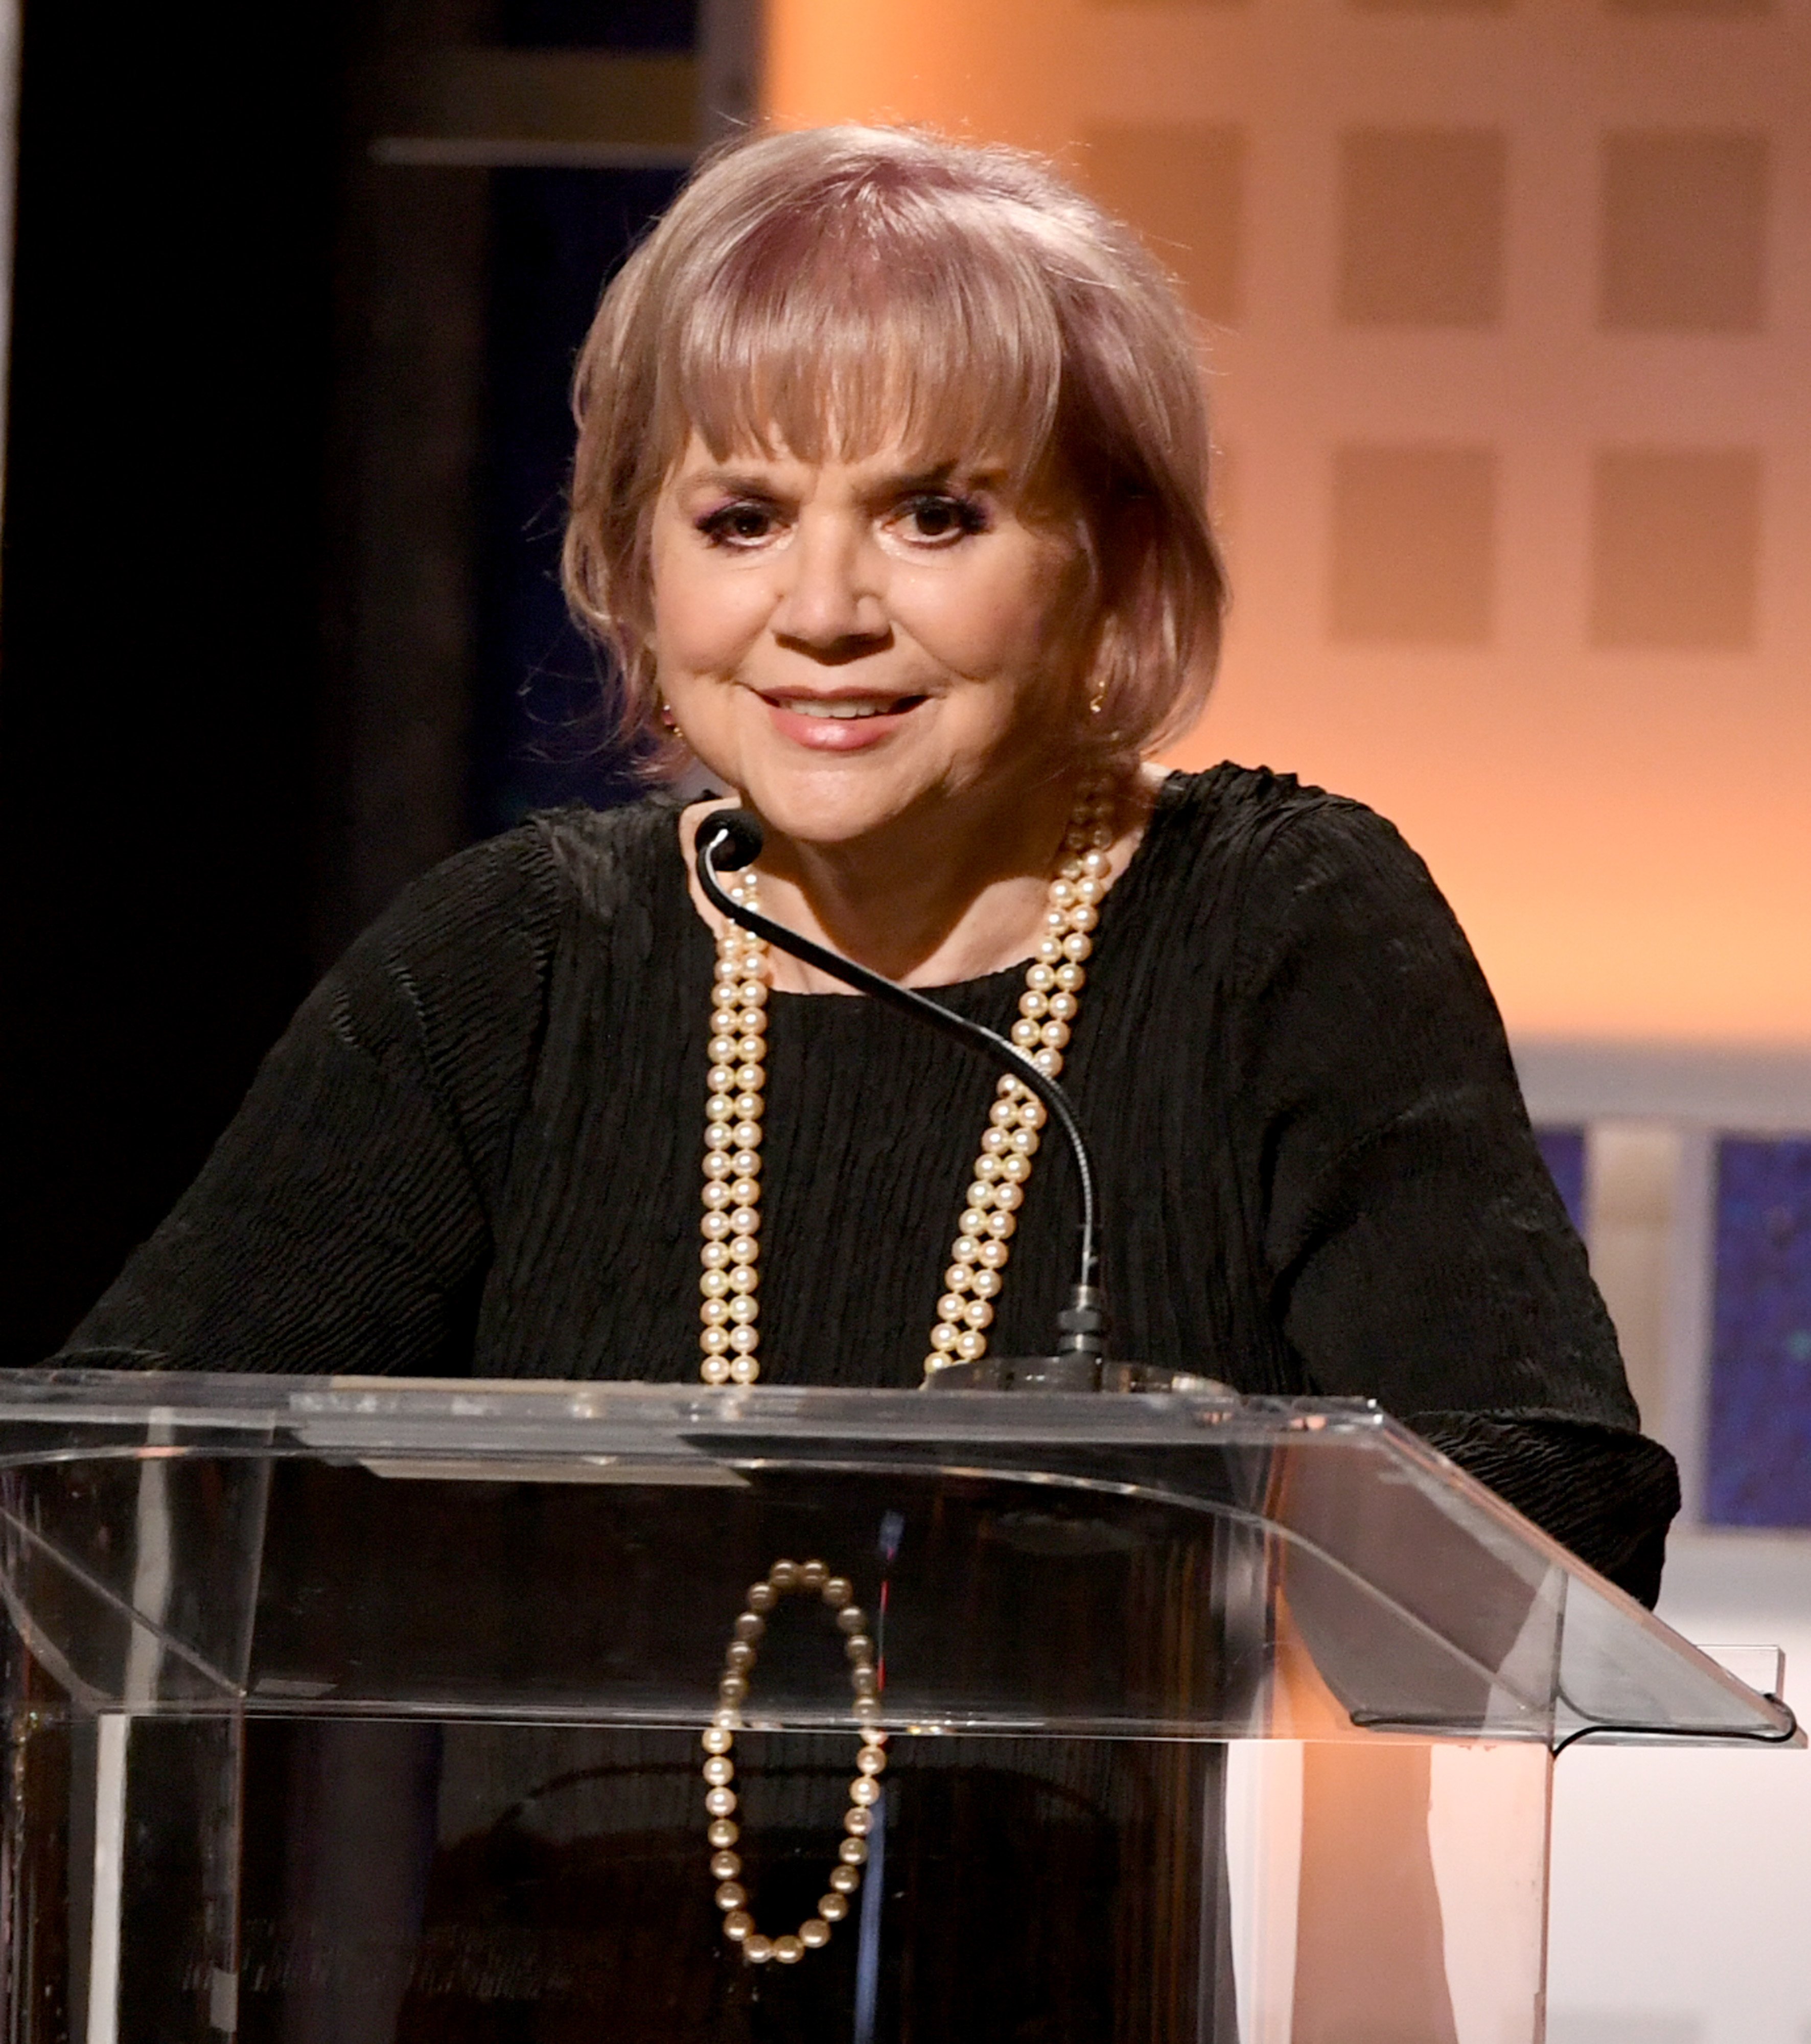 Linda Ronstadt accepting the award for Best Documentary for "Linda Ronstadt: The Sound of My Voice" at the AARP The Magazine's 19th Annual Movies For Grownups Awards on January 11, 2020 | Source: Getty Images